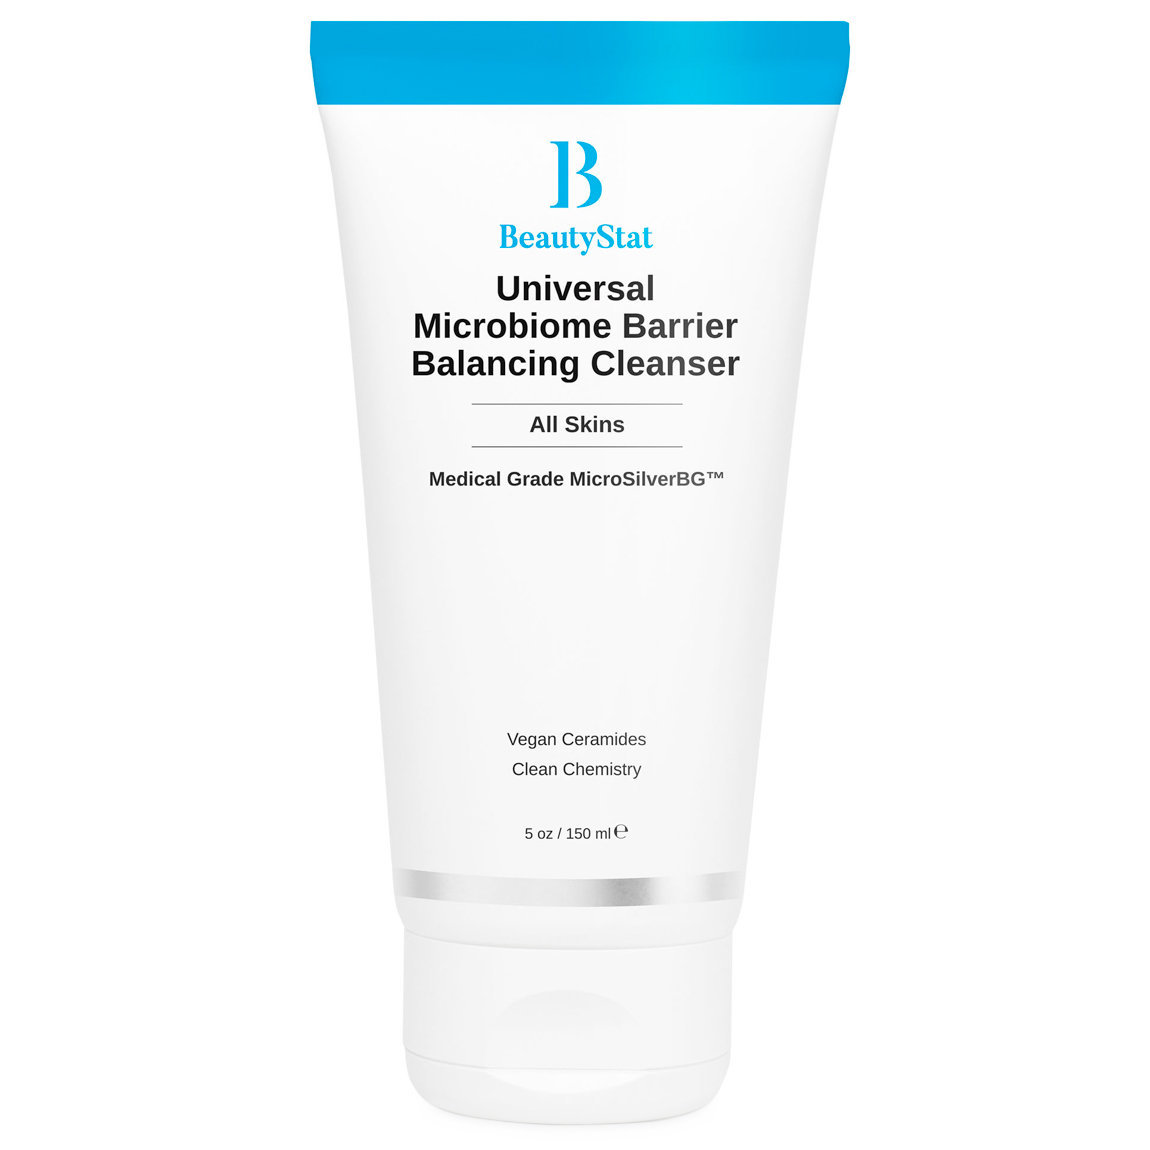 BeautyStat Universal Microbiome Barrier Balancing Cleanser alternative view 1 - product swatch.